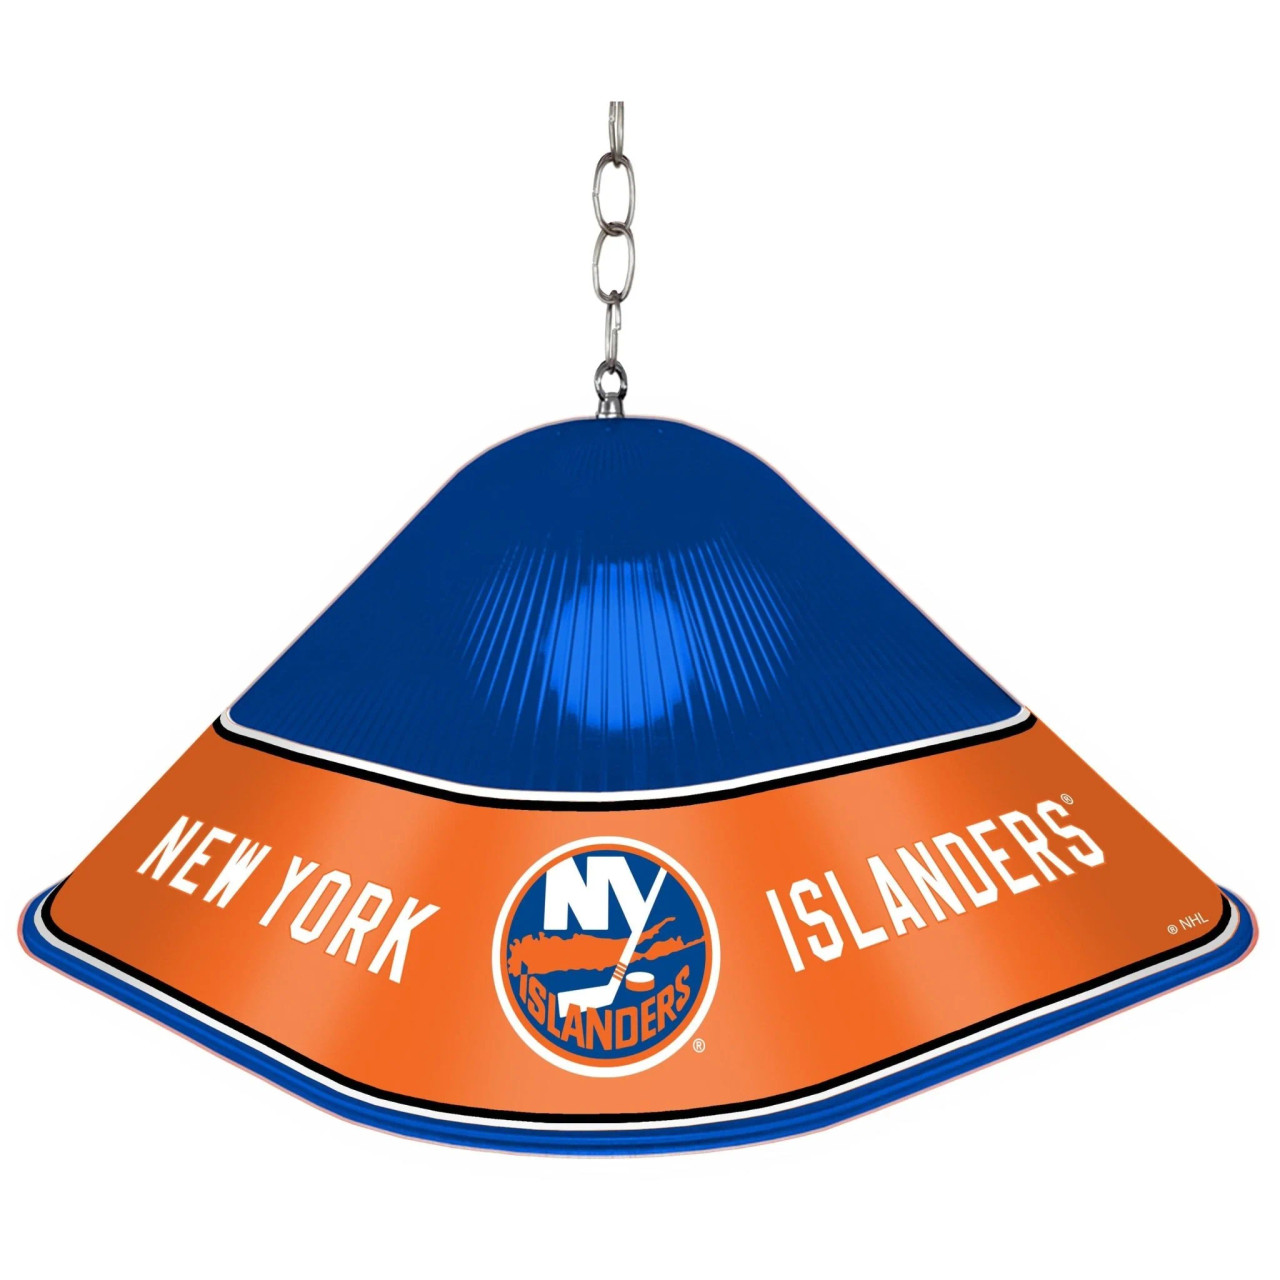 NY, New York, Islanders, Game, Table, Light, Lamp, NHNYIS-410-01, The Fan-Brand, NHL, 686082114882